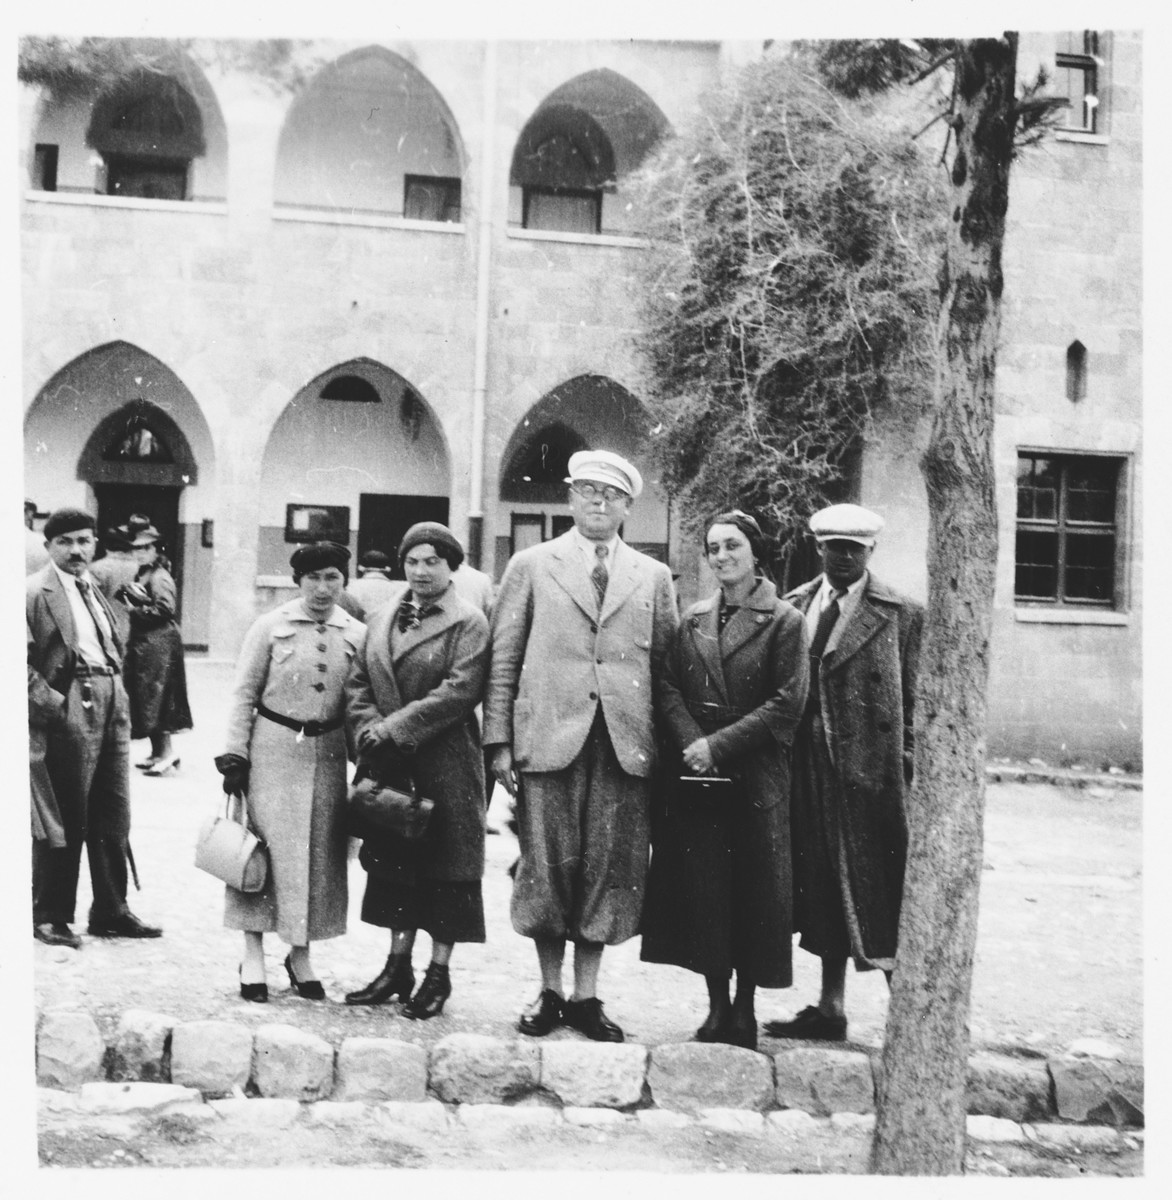 A group of Jews from Osijek, Croatia visit Palestine during the 1935 Maccabi games.

Among those pictured is Ilonka Spitzer (second from the right).